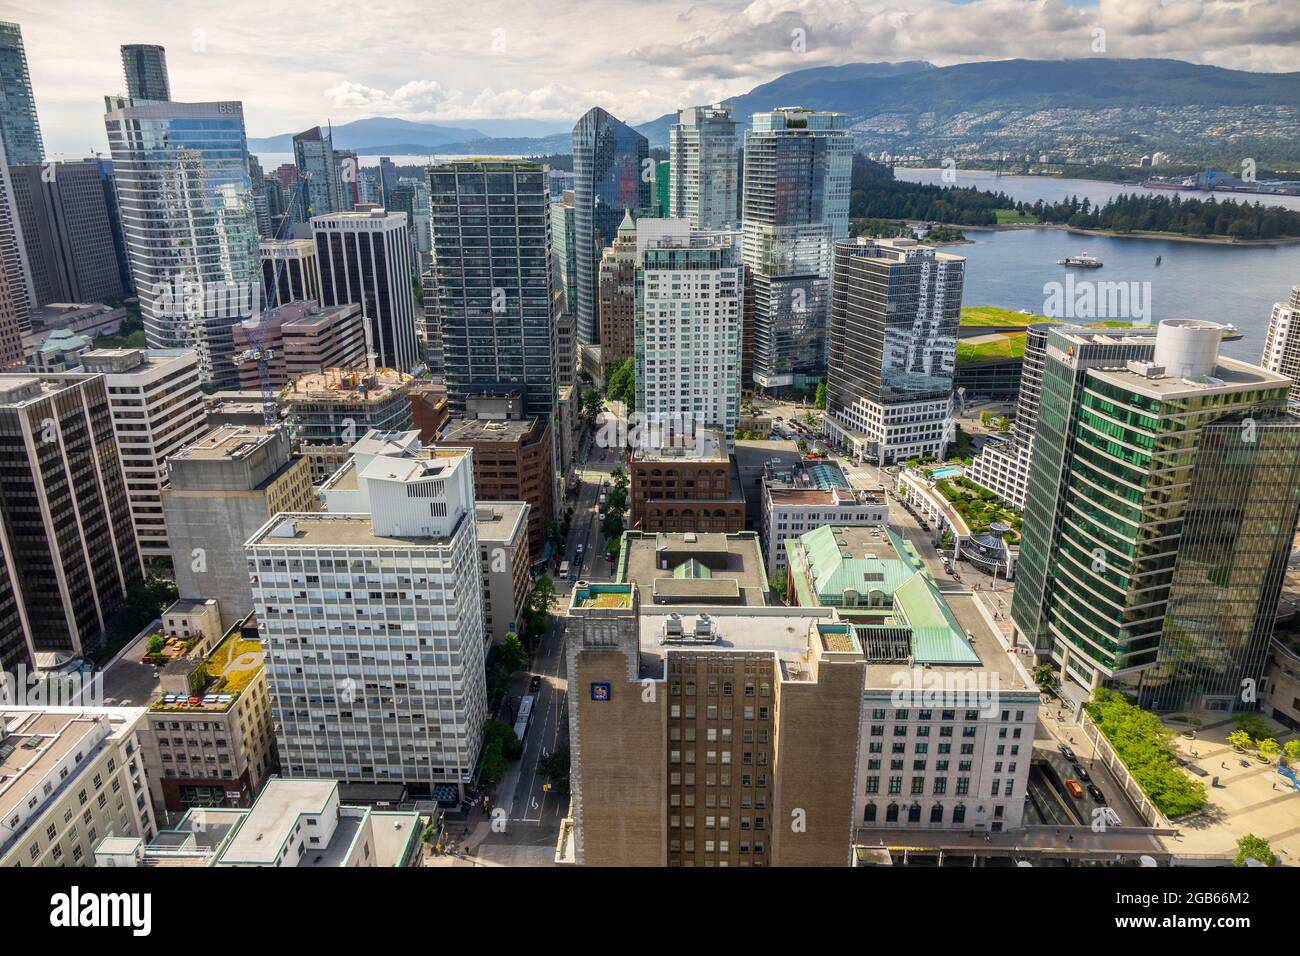 Downtown Vancouver British Columbia Aerial Skyscrapers Vancouver Canada Stock Photo